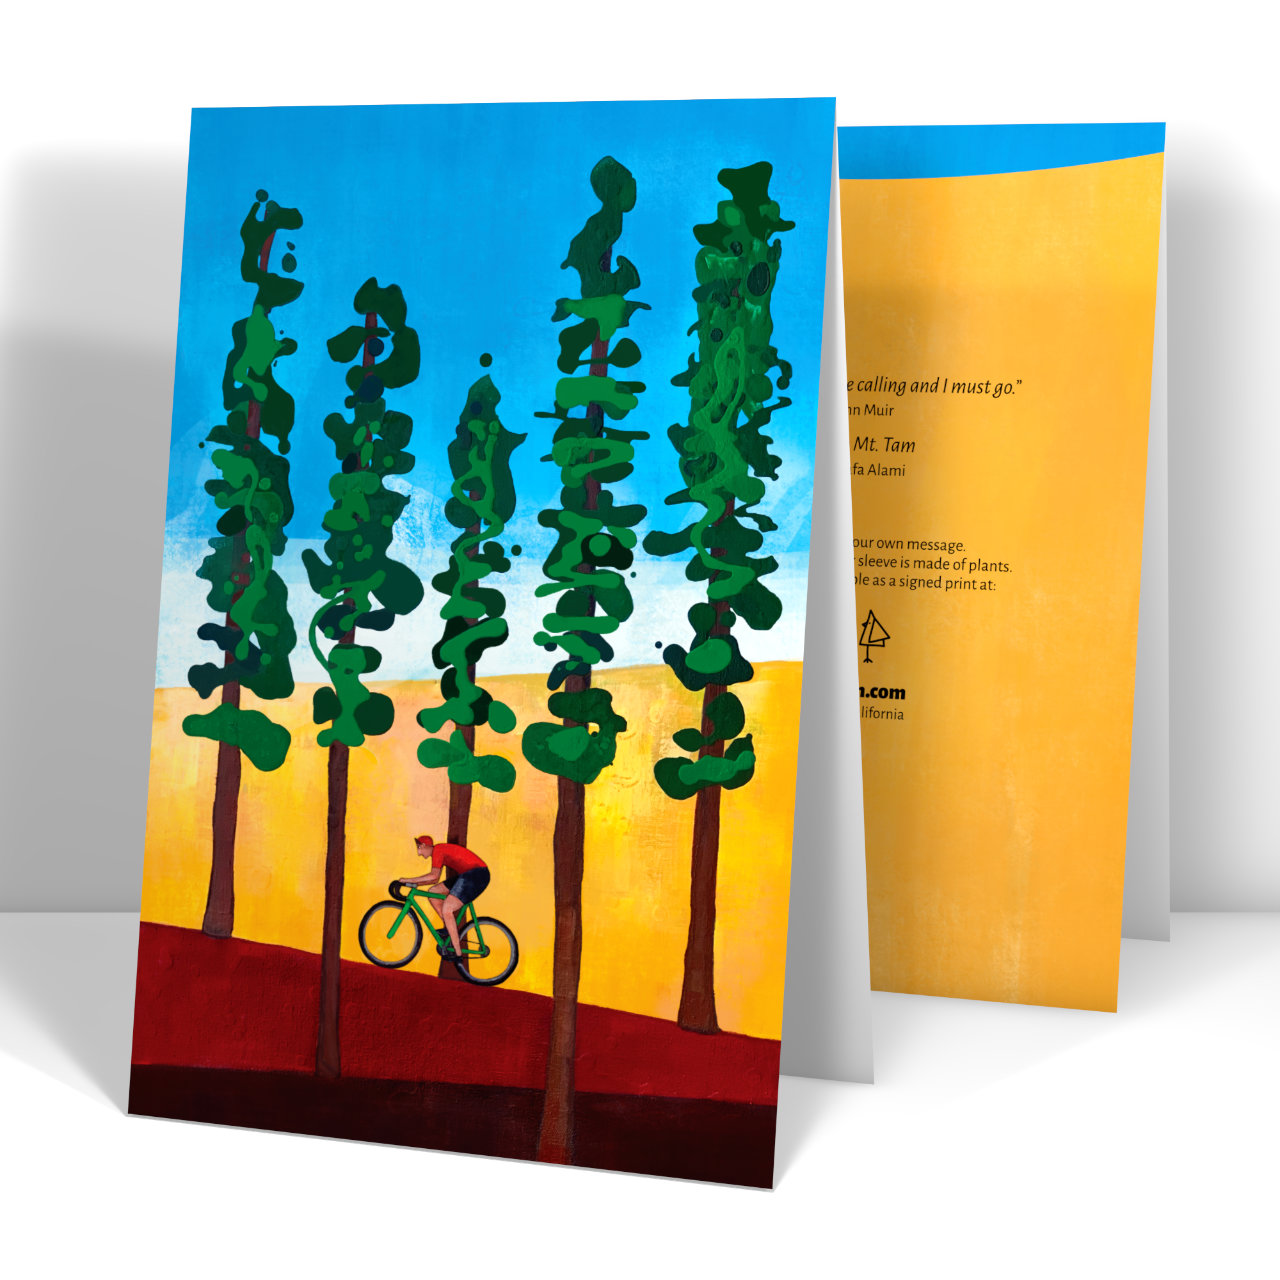 Painting of Bicycle Rider climbing up Mt. Tam